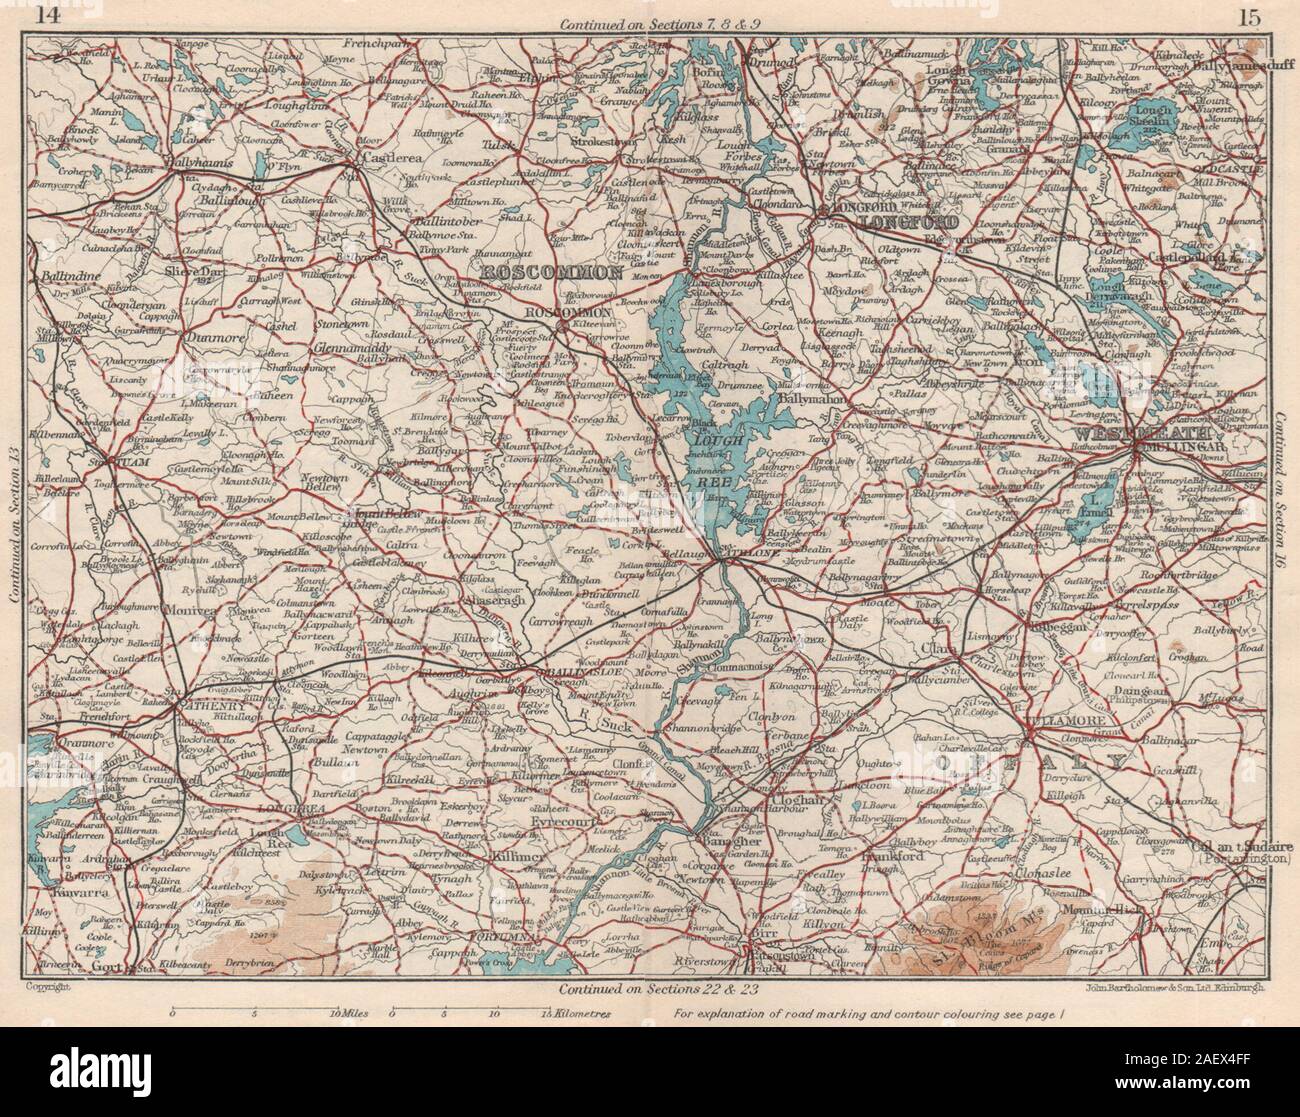 IRELAND MIDLANDS. Roscommon Longford Westmeath Offaly Galway. Vintage map 1949 Stock Photo